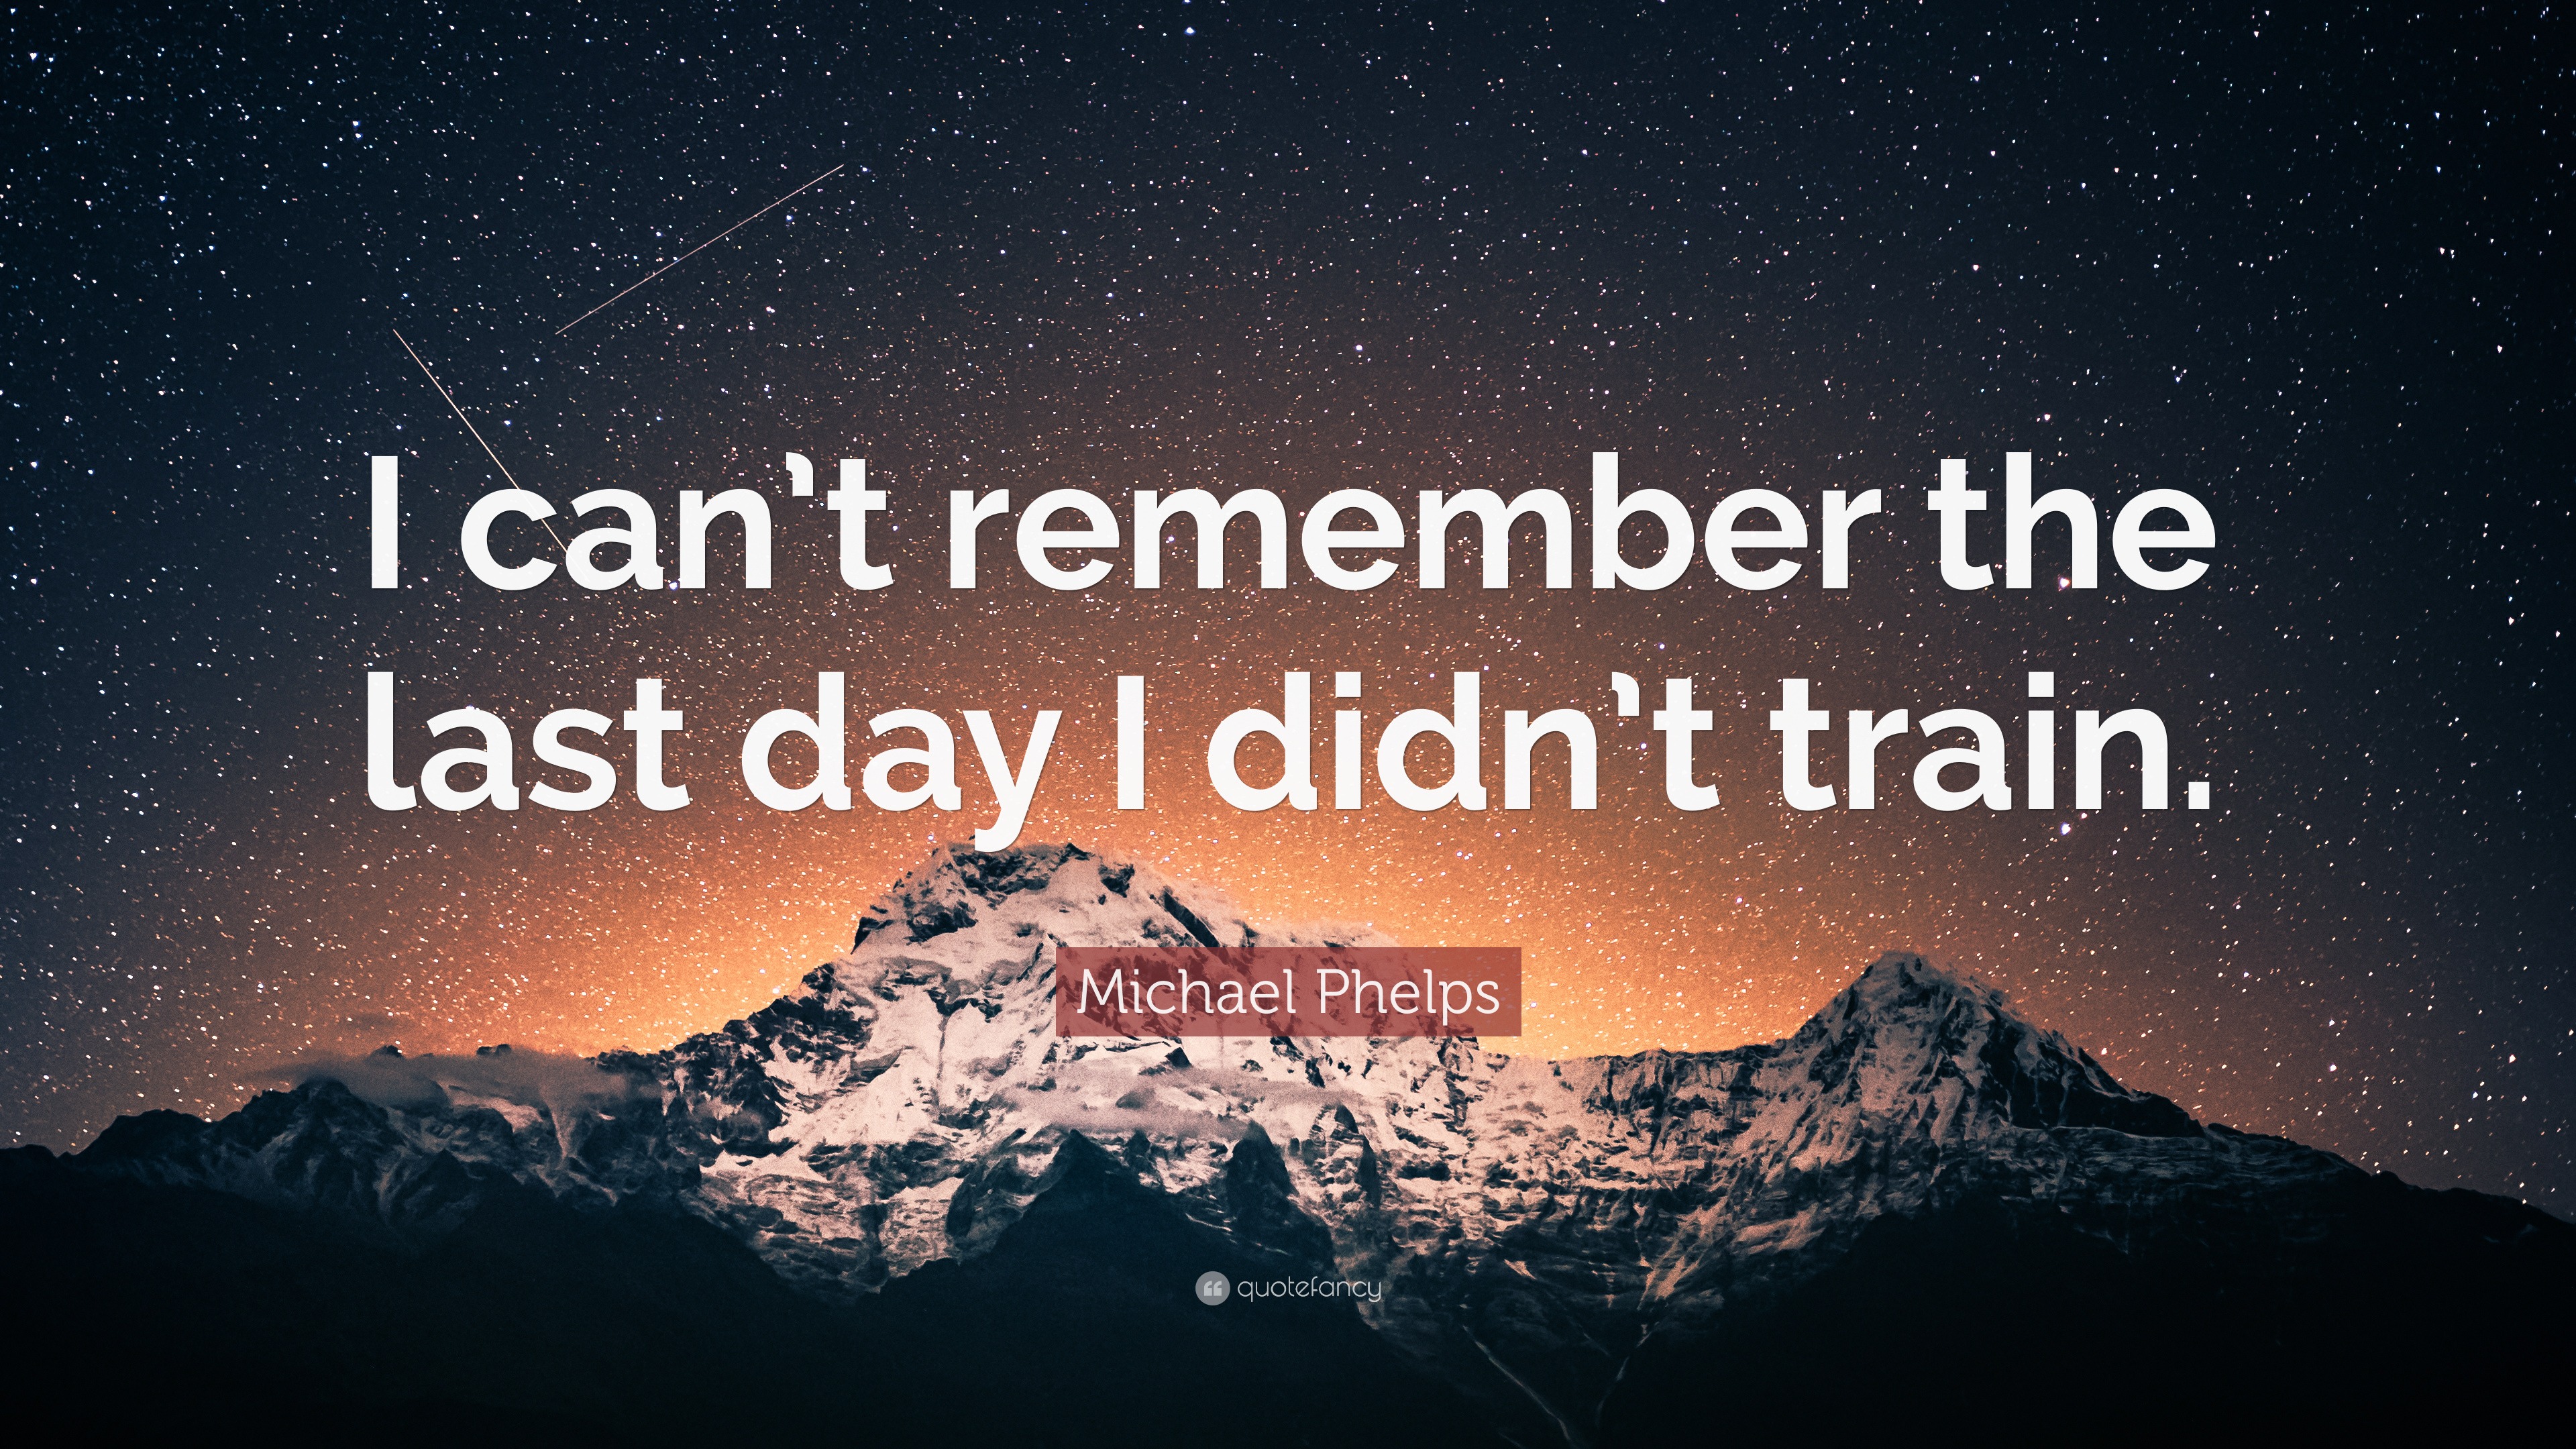 Michael Phelps Quote I Can T Remember The Last Day I Didn T Train